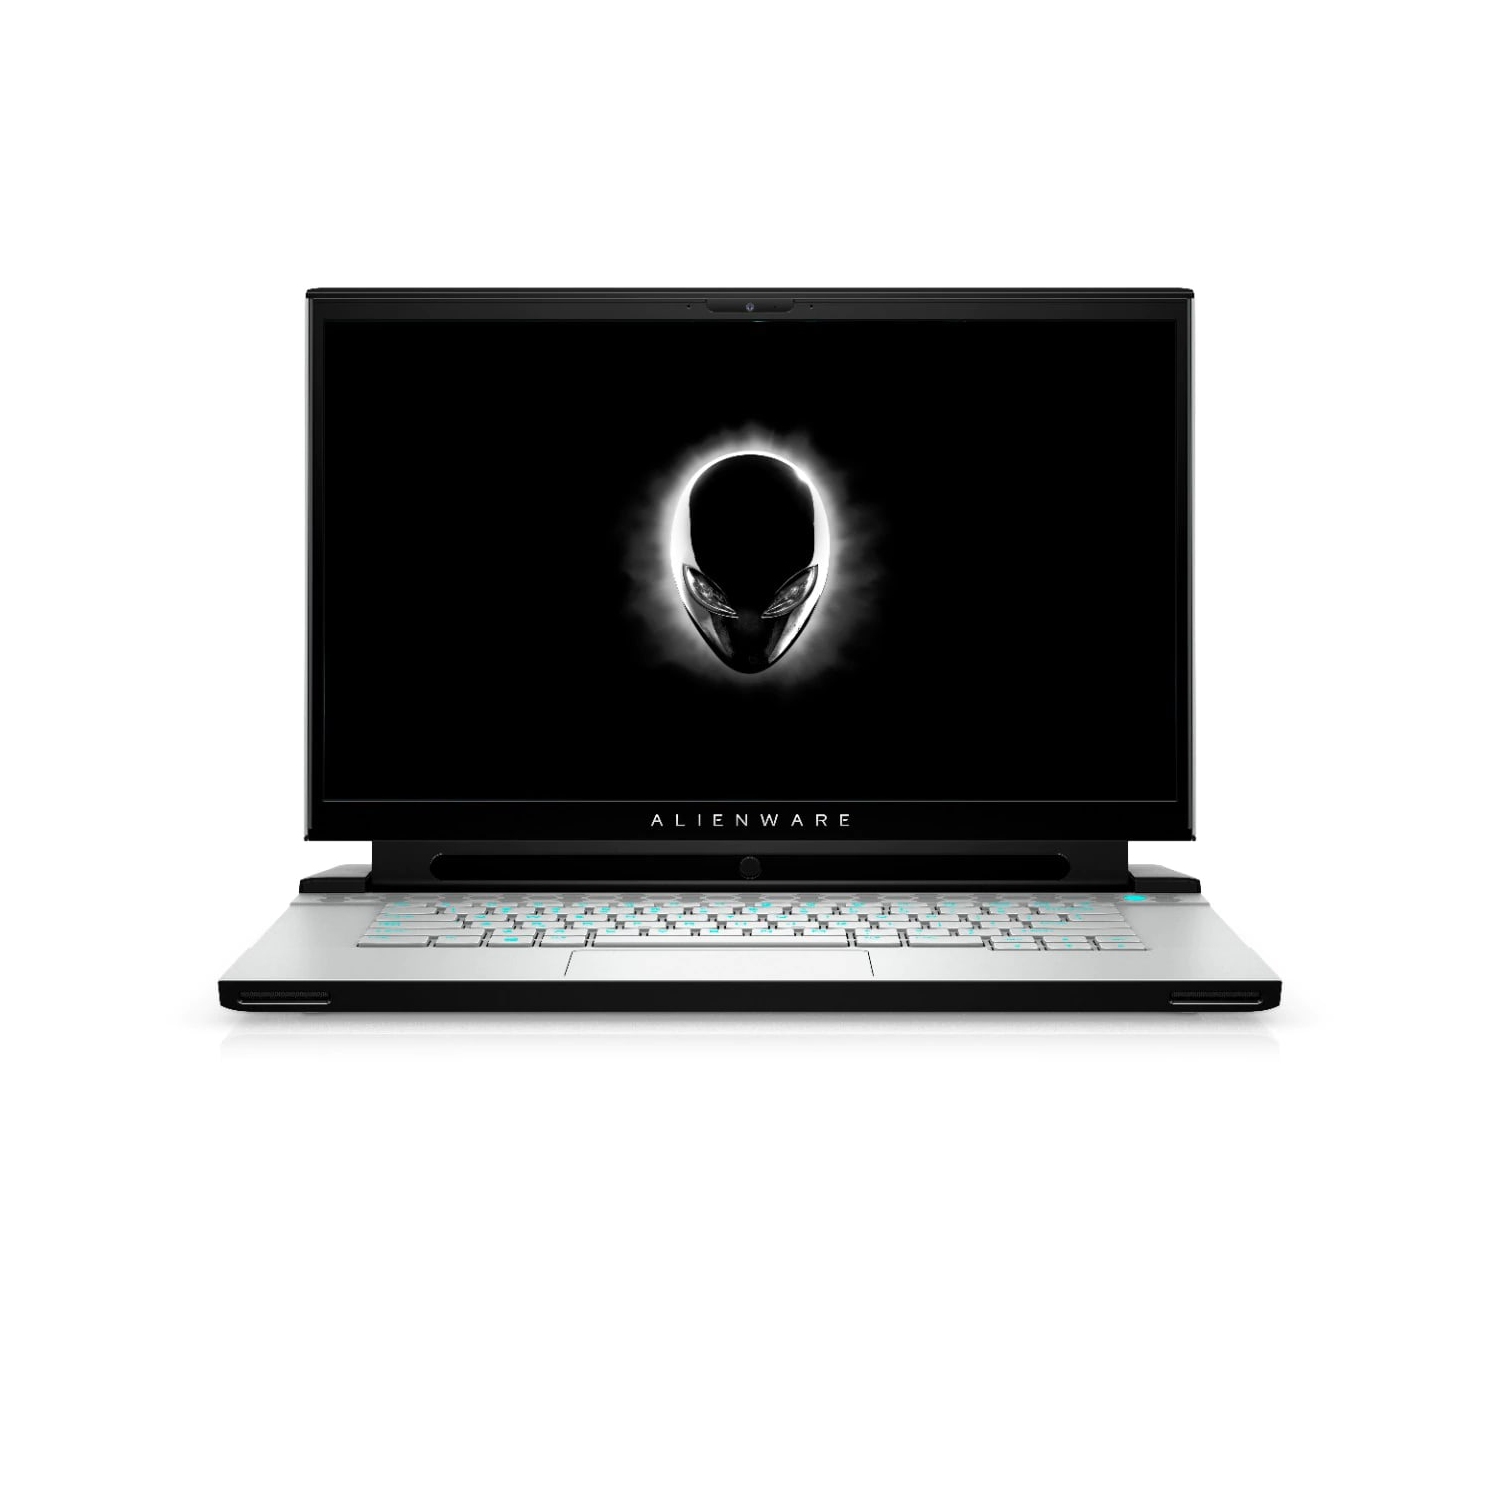 Refurbished (Excellent) - Dell Alienware m15 R3 Gaming Laptop (2020), 15.6" FHD, Core i7, 256GB SSD, 16GB RAM, 1660 Ti, 6 Cores @ 5 GHz, 10th Gen CPU Certified